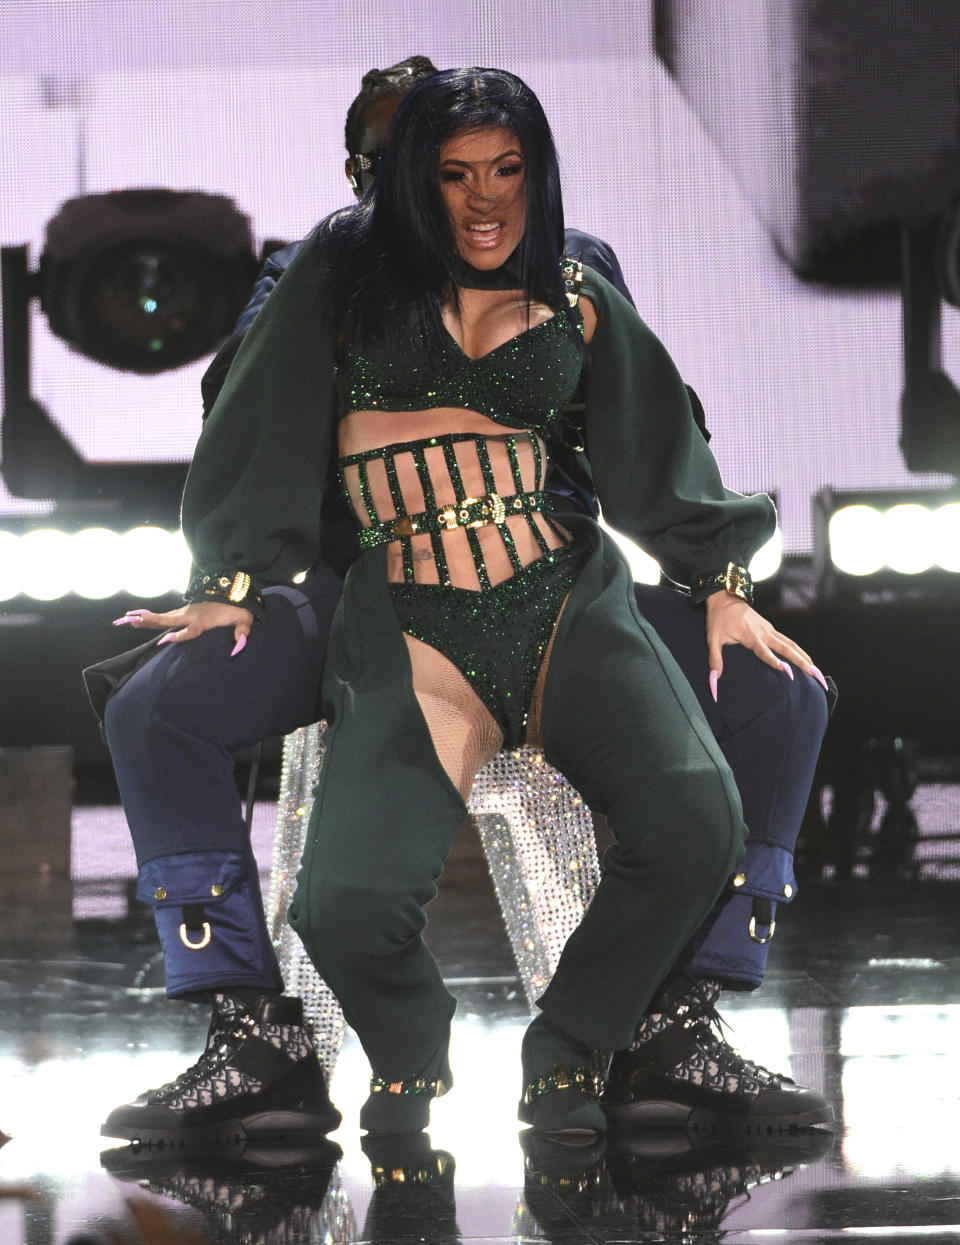 Cardi B, foreground, and Offset perform at the BET Awards on Sunday, June 23, 2019, at the Microsoft Theater in Los Angeles. (Photo by Chris Pizzello/Invision/AP)